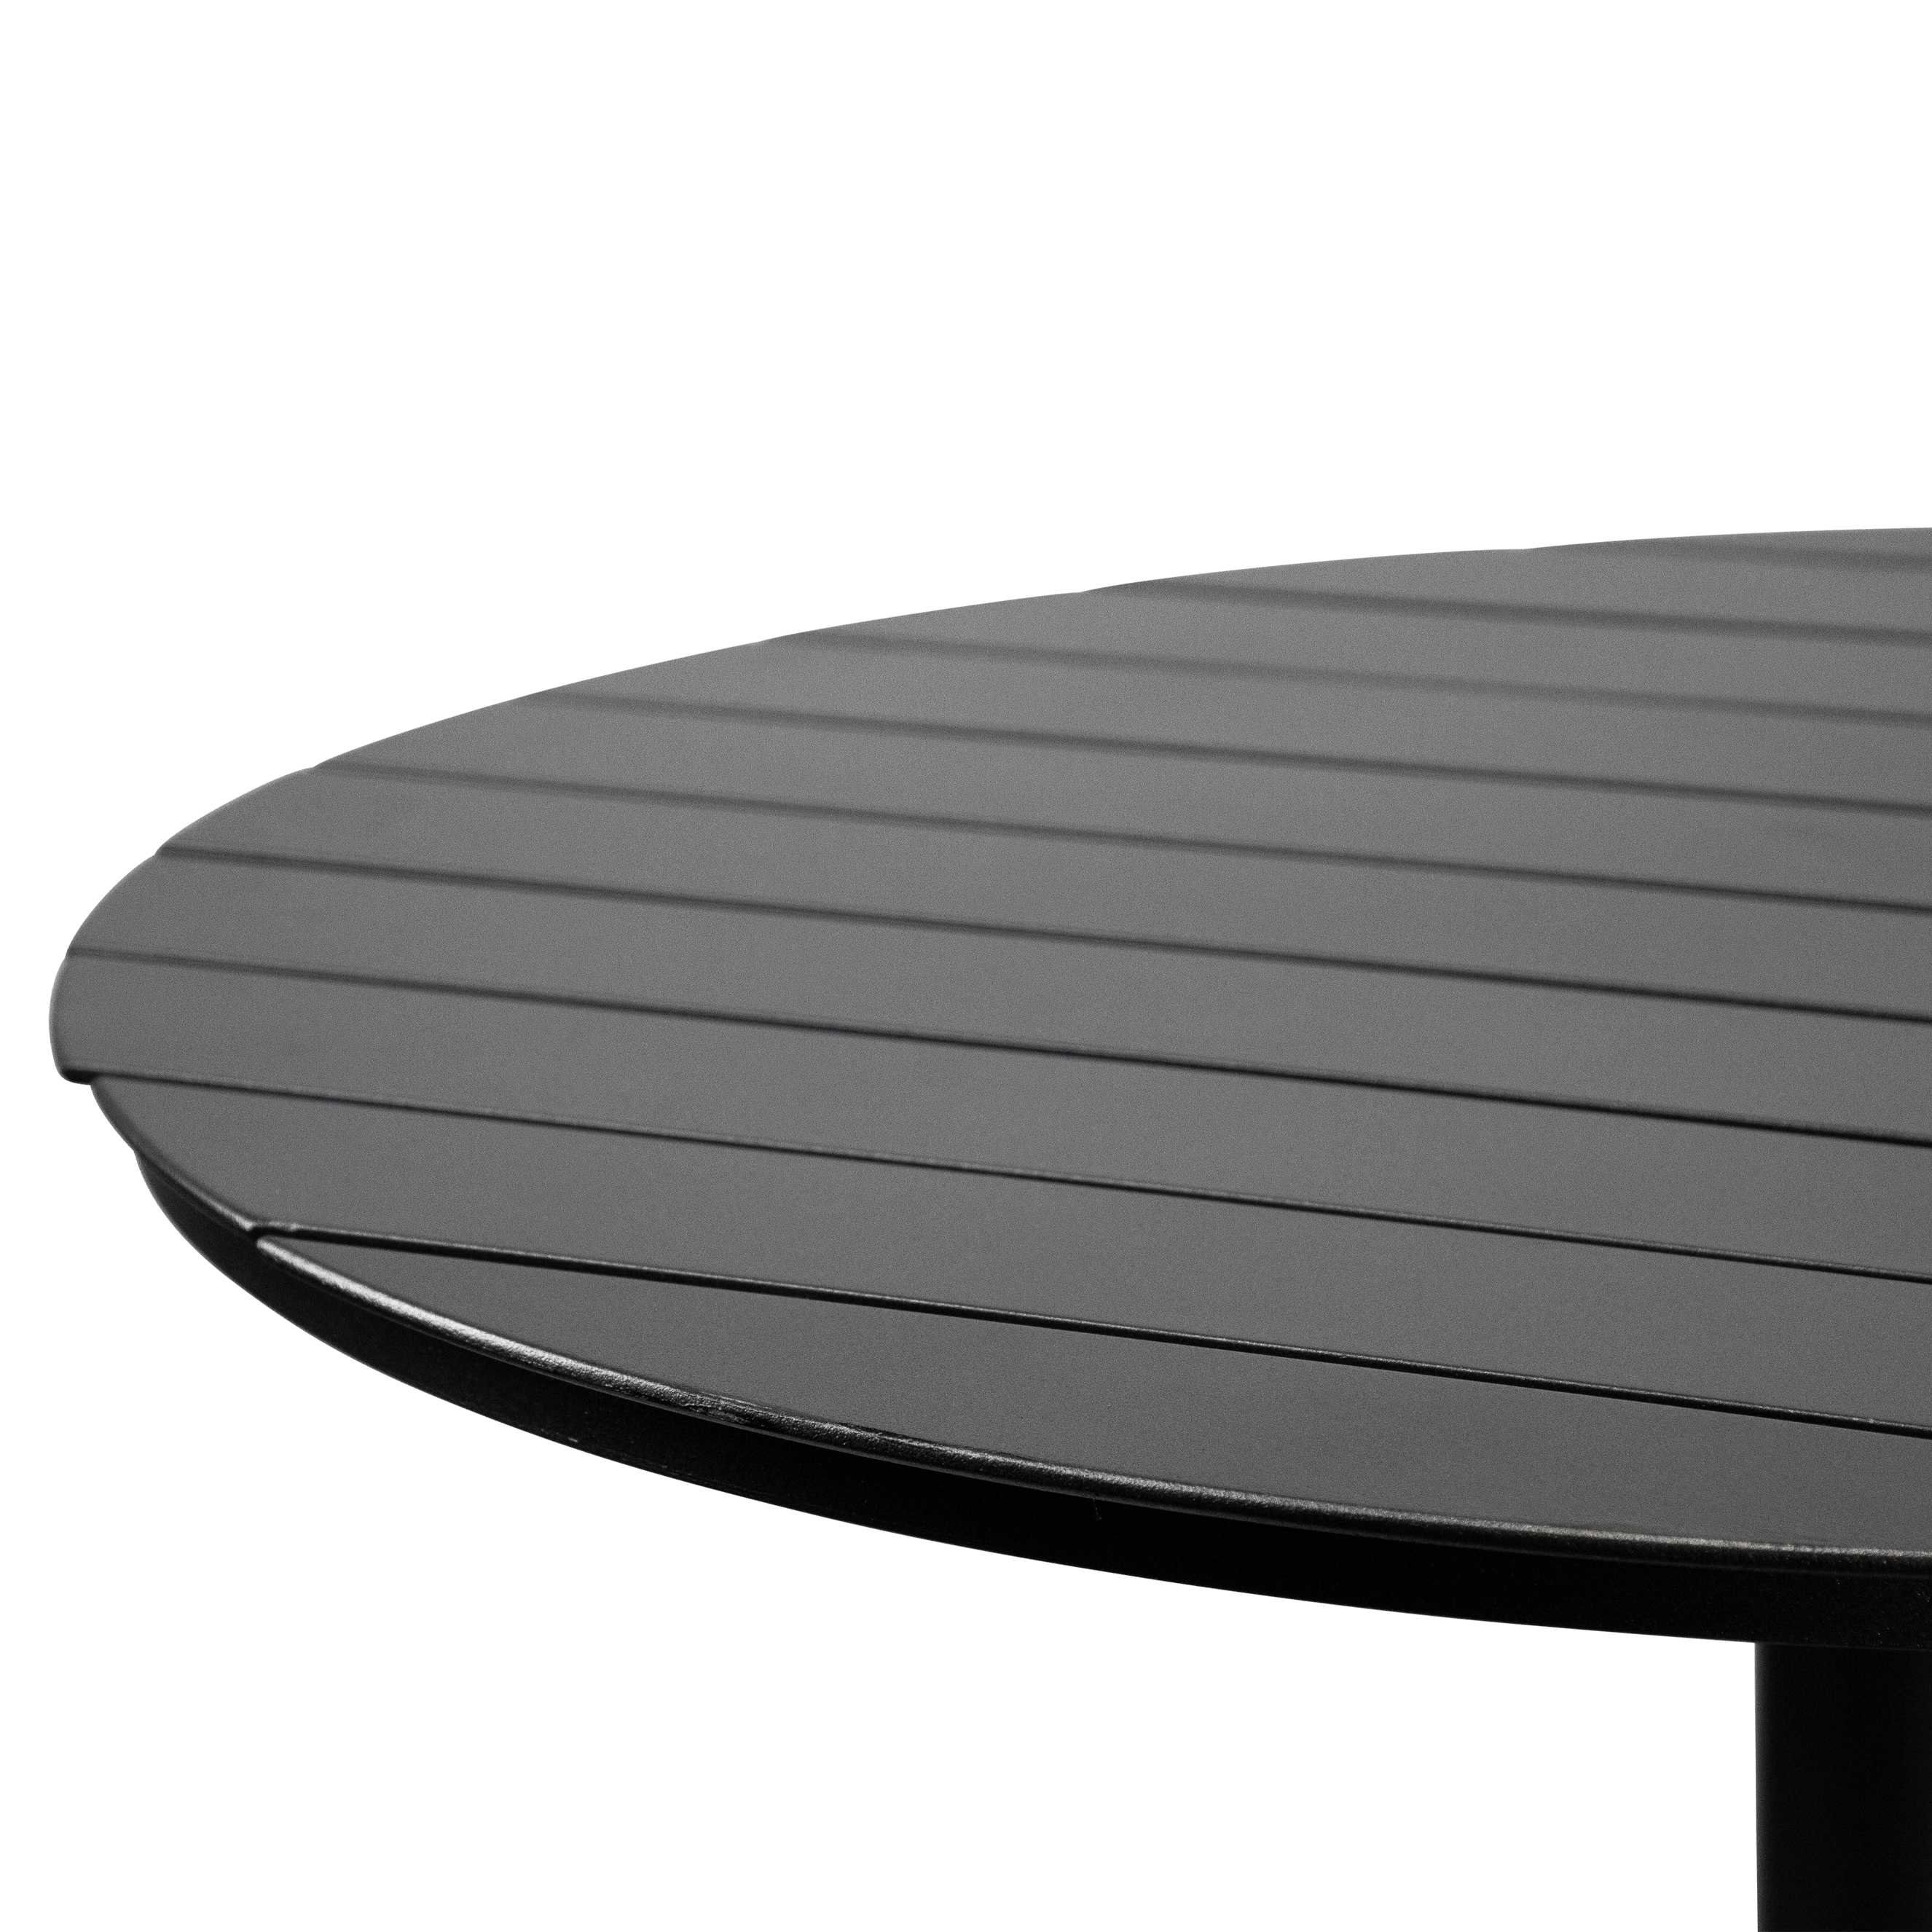 Cafe Collection Round Dining Table in Aluminium and Steel Base in Gunmetal